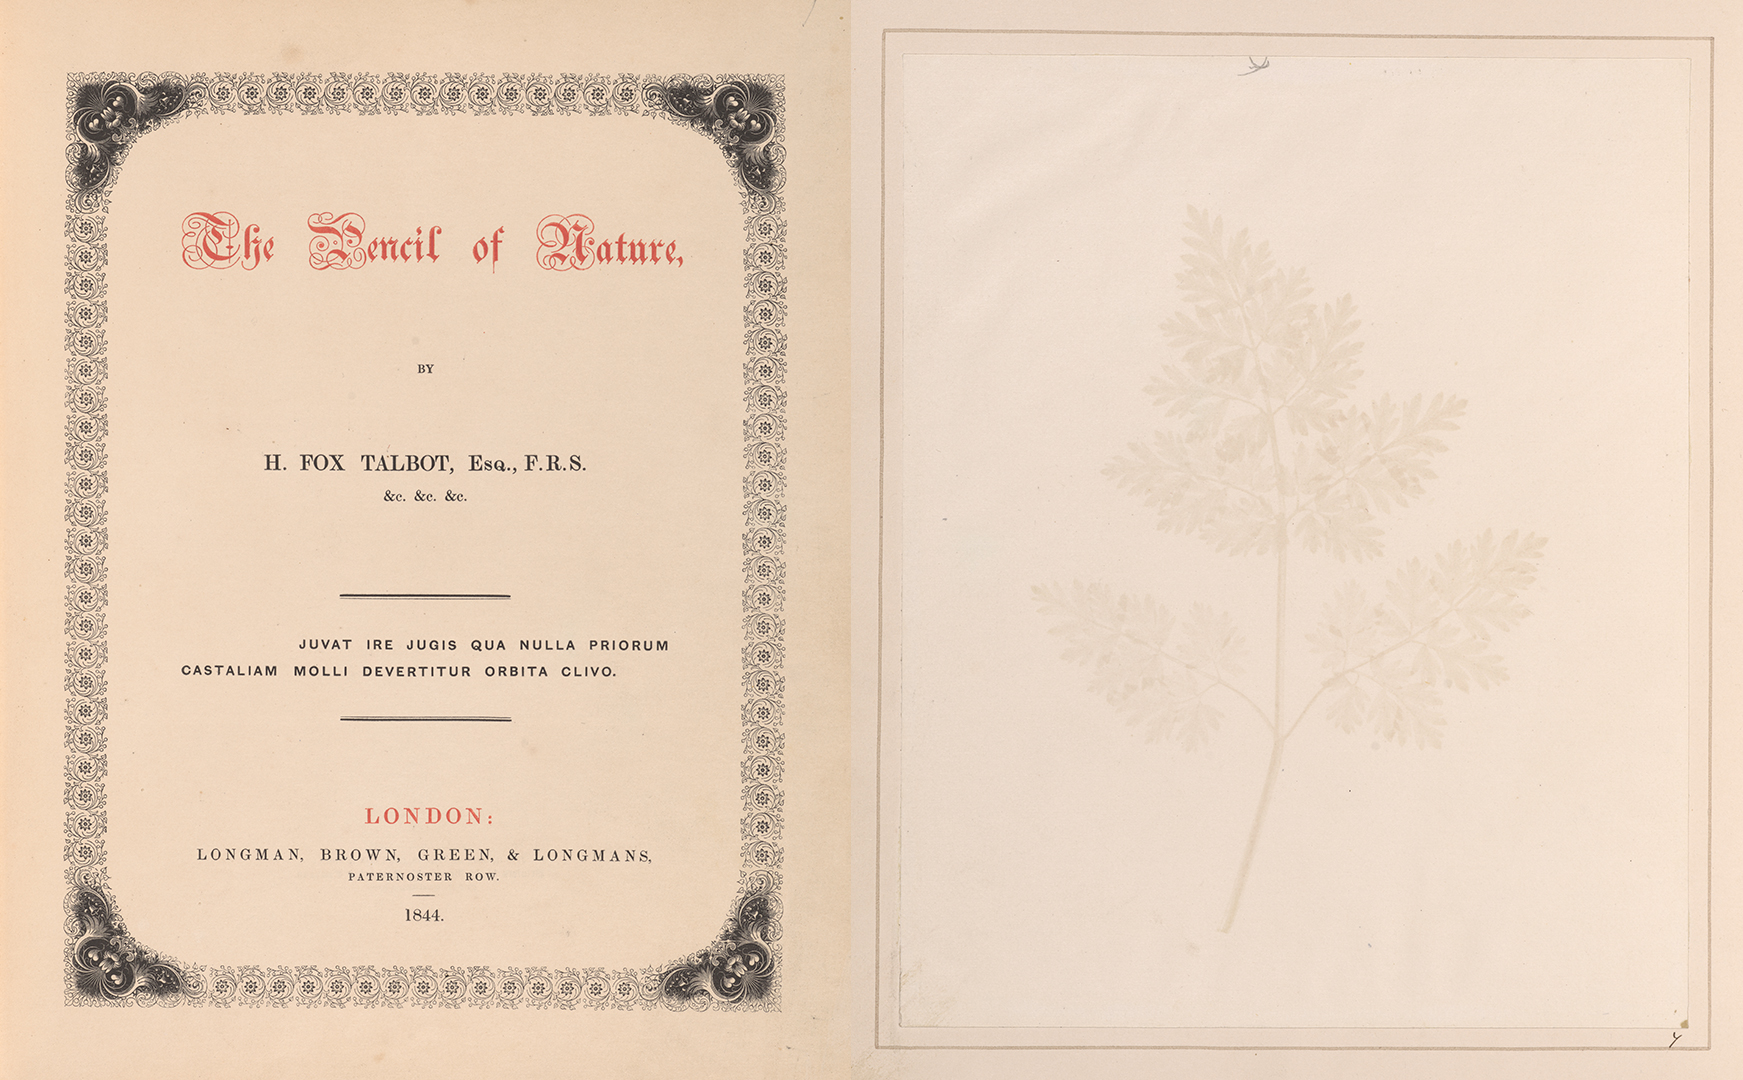 Two pages of a book: a title page (left) with red text that says, “The Pencil of Nature,” and a leaf print (right).